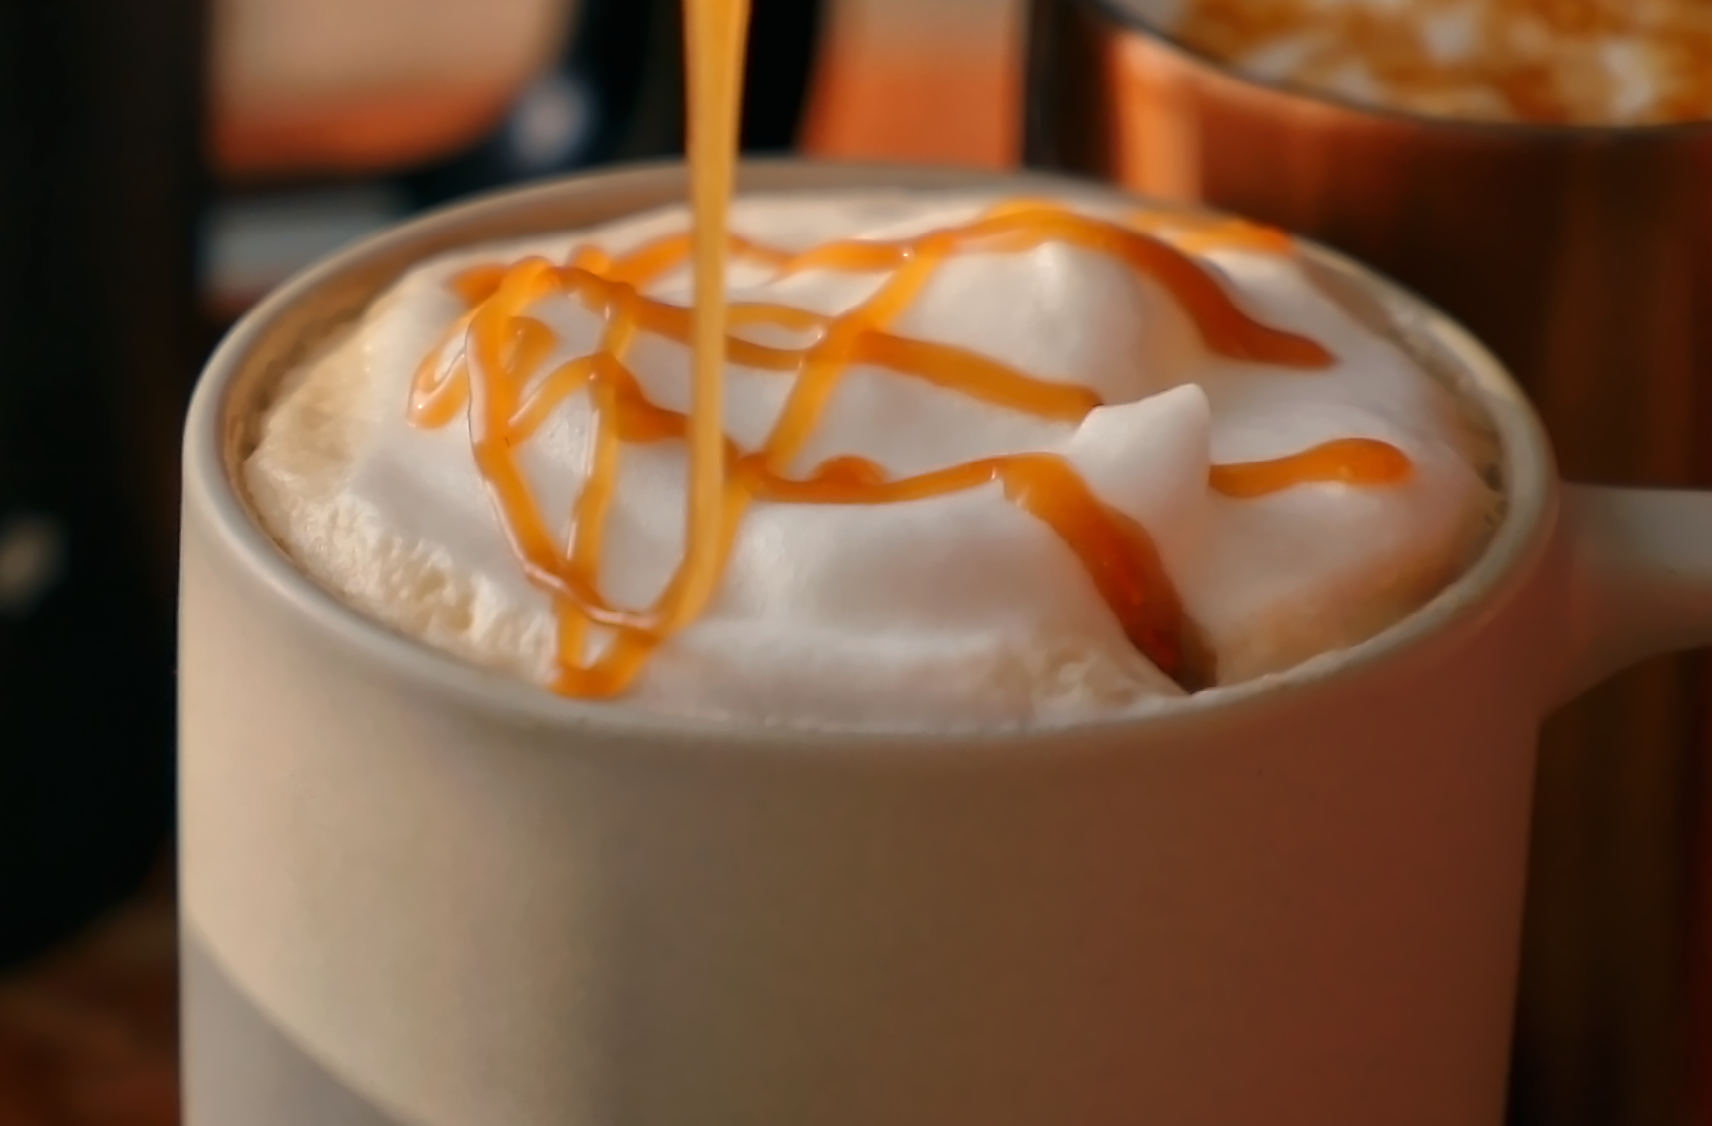 Dulce de leche caramel is being drizzled onto a mug of a cookie butter flavoured latte